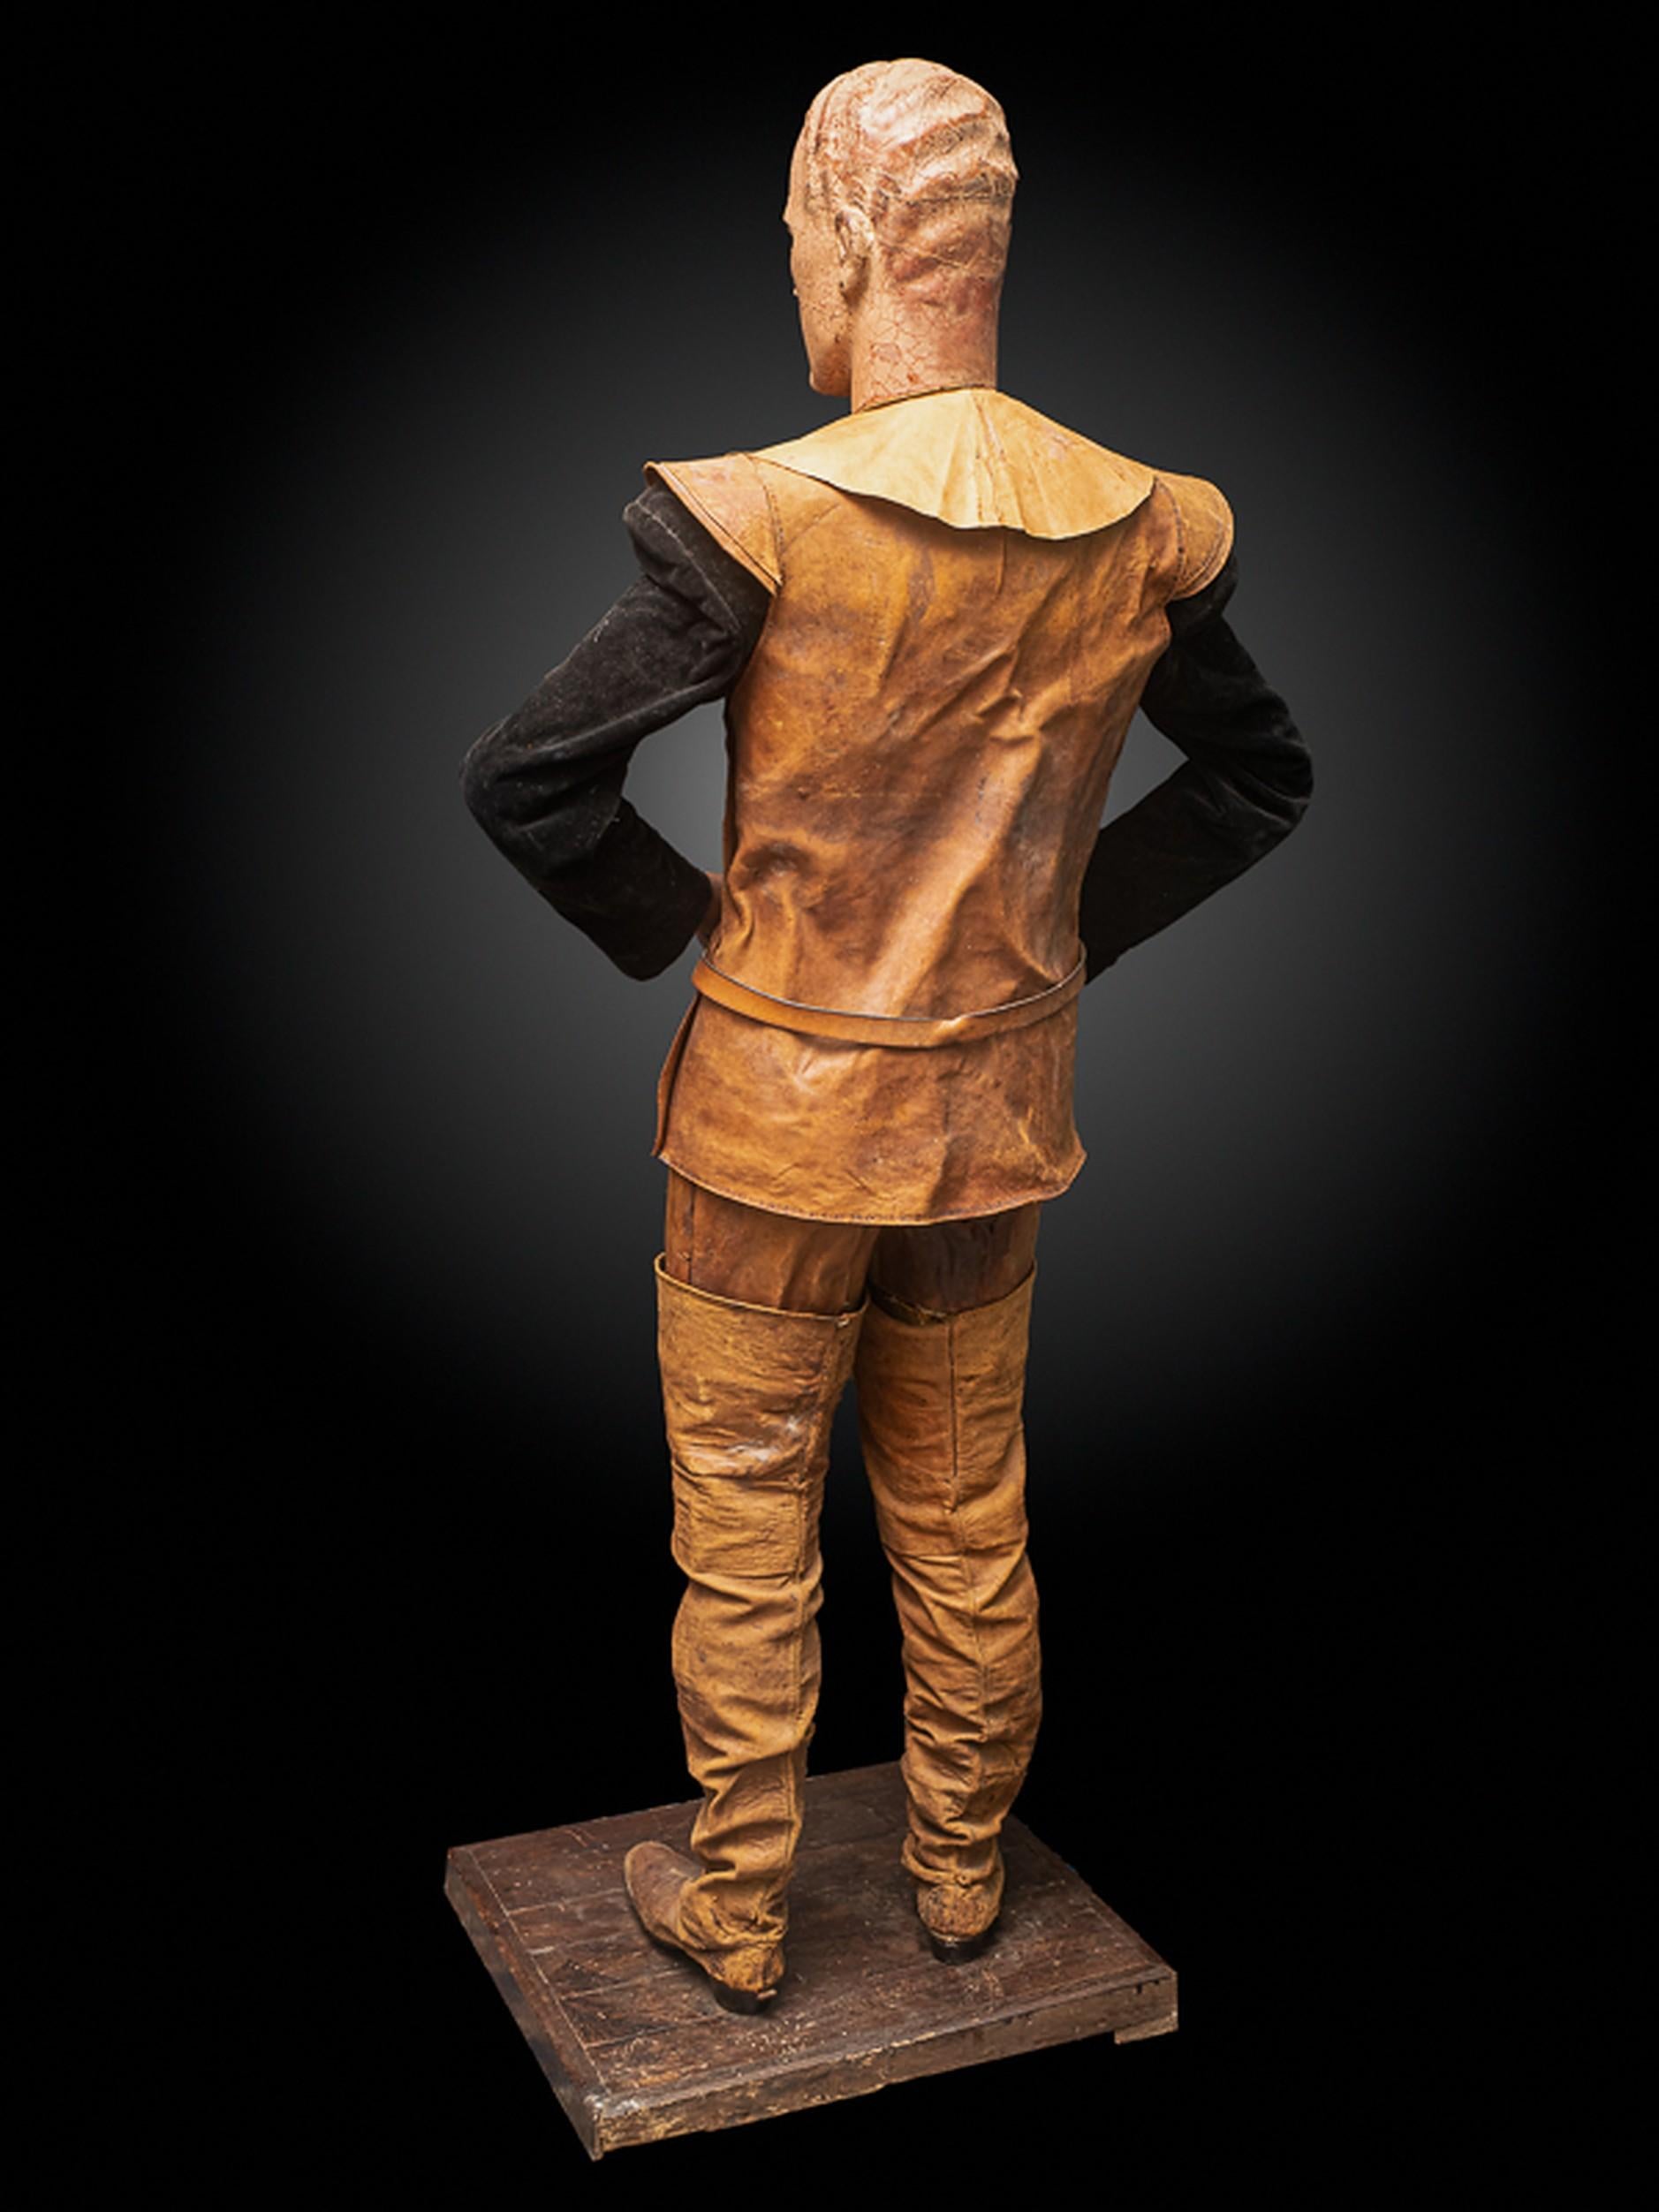 Hand-Carved Lifesize Vintage Wooden Mannequin Featuring Articulated Arms and Legs For Sale